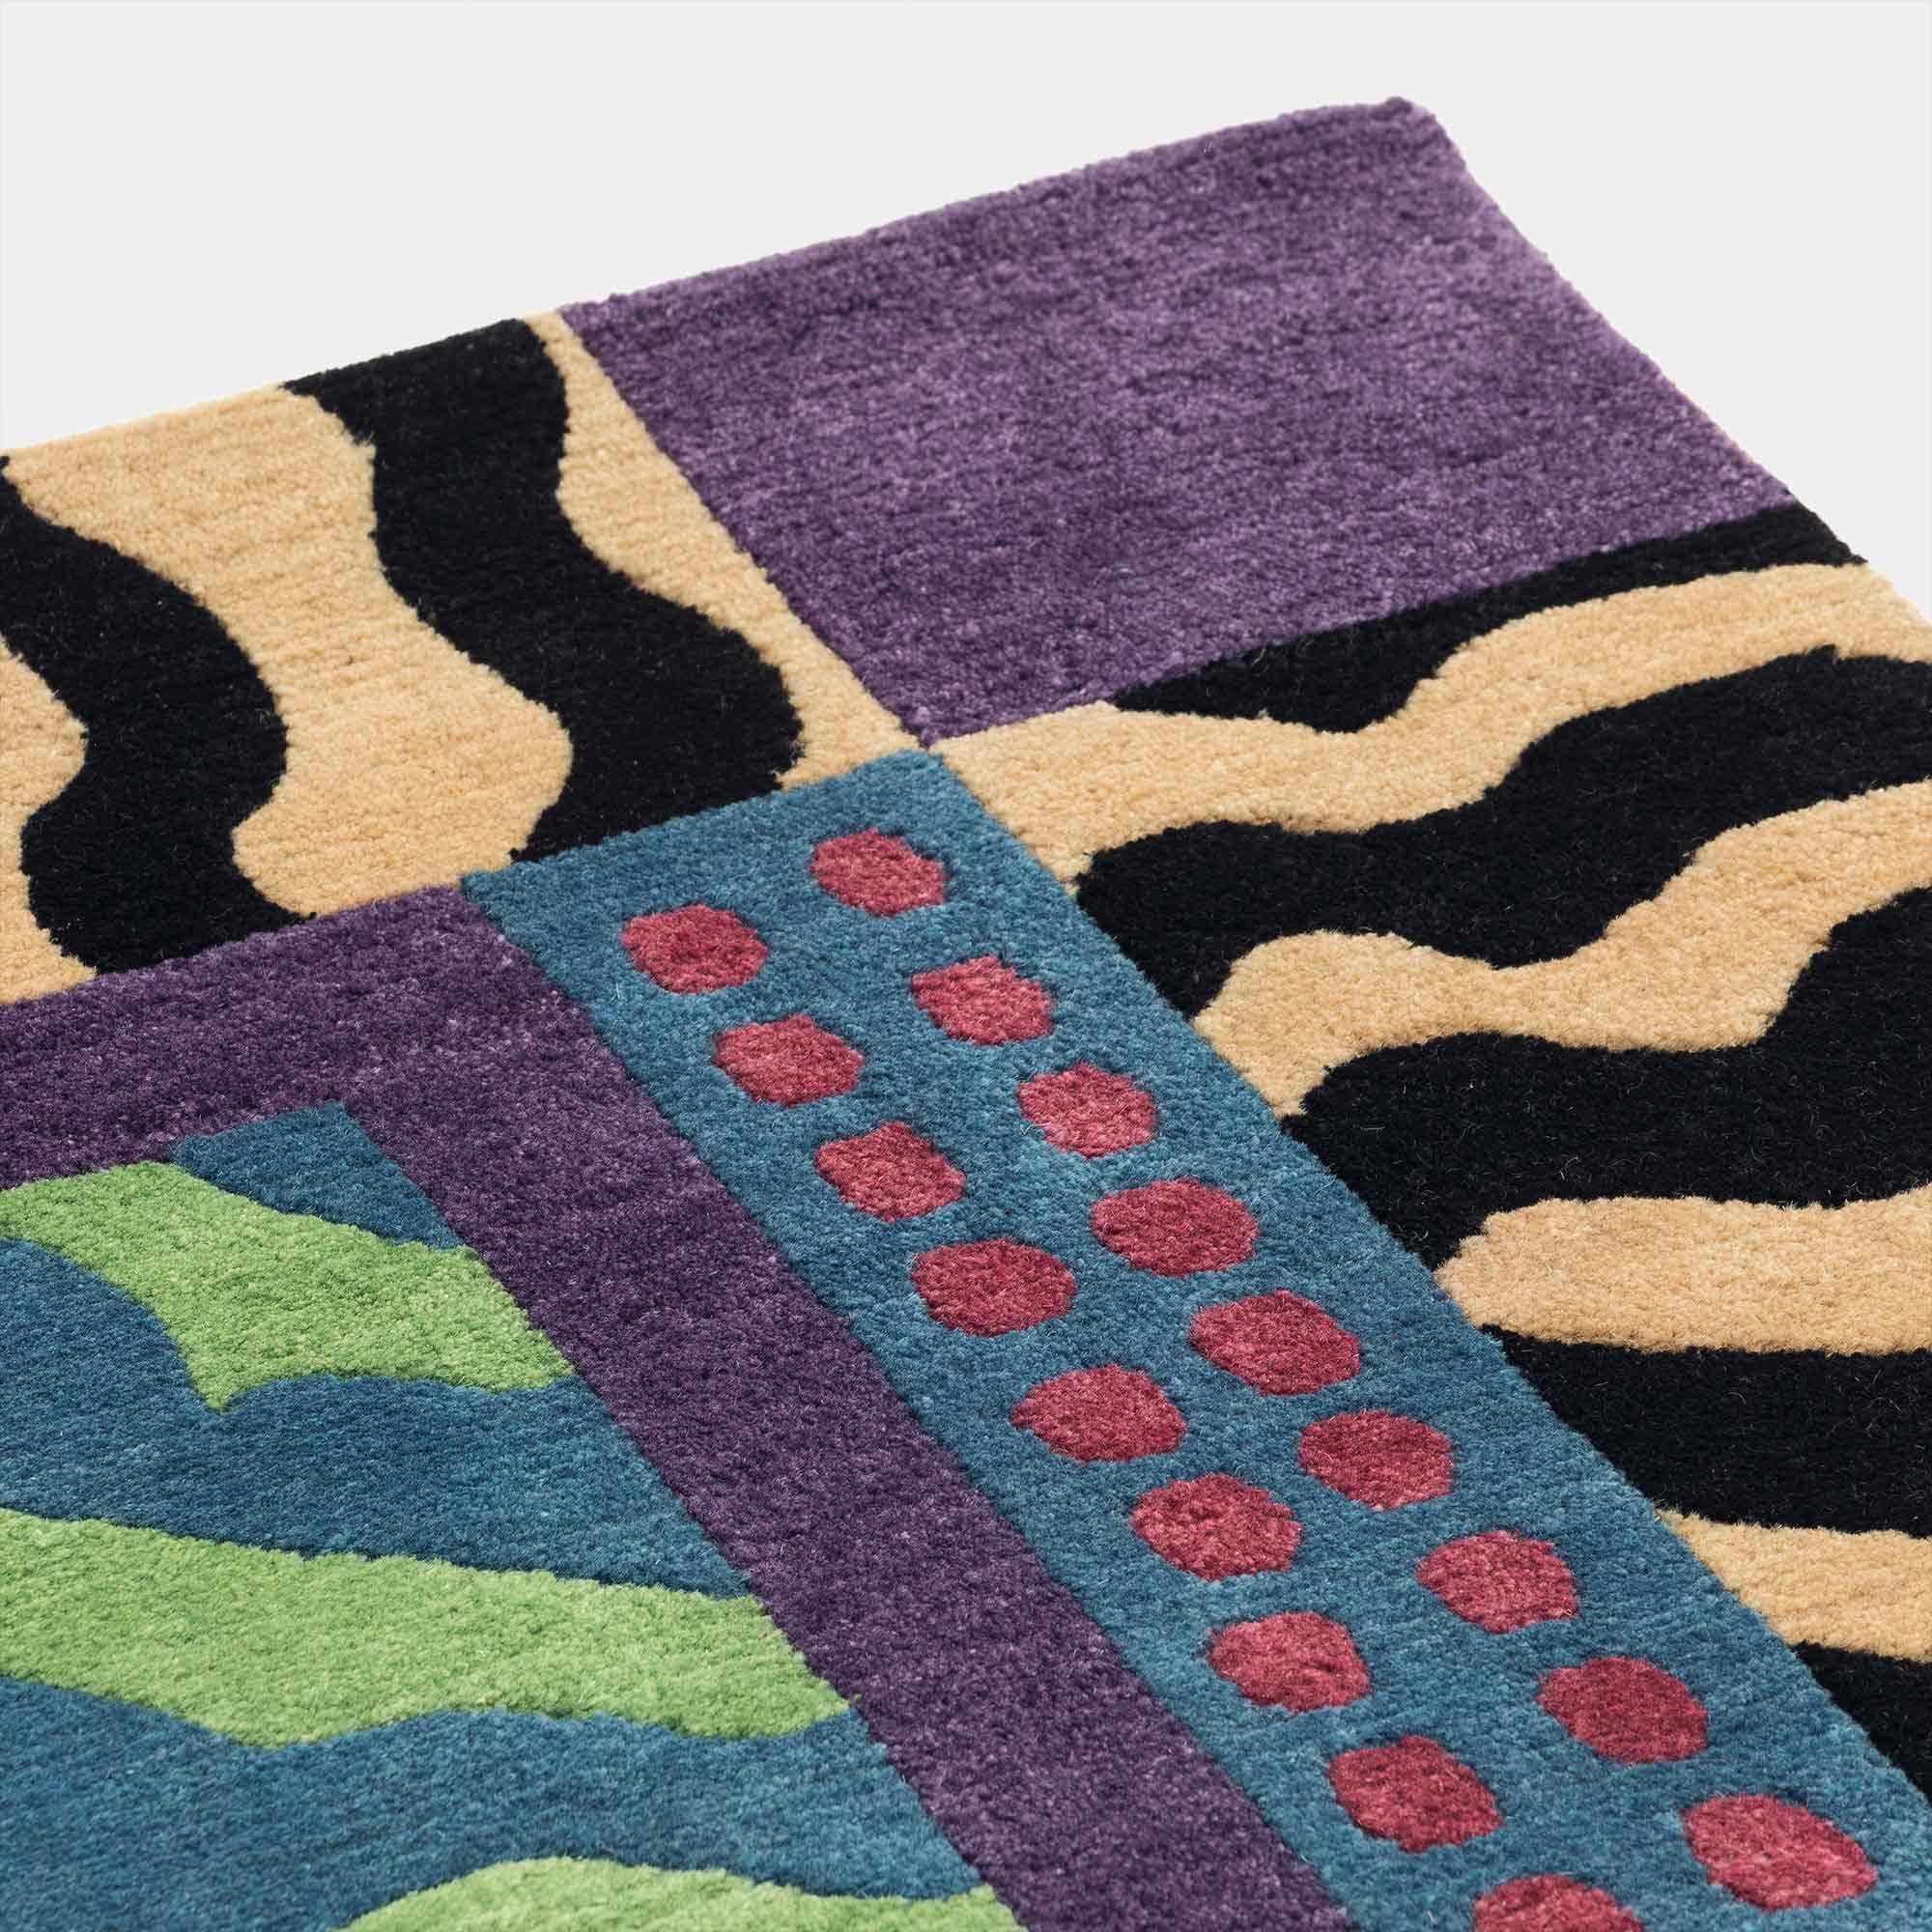 Large Sottovento woollen carpet by Nathalie Du Pasquier for Post Design collection/Memphis

A woollen carpet handcrafted by different Nepalese artisans. Made in a limited edition of 36 signed, numbered examples.

As the carpet is made by hand,